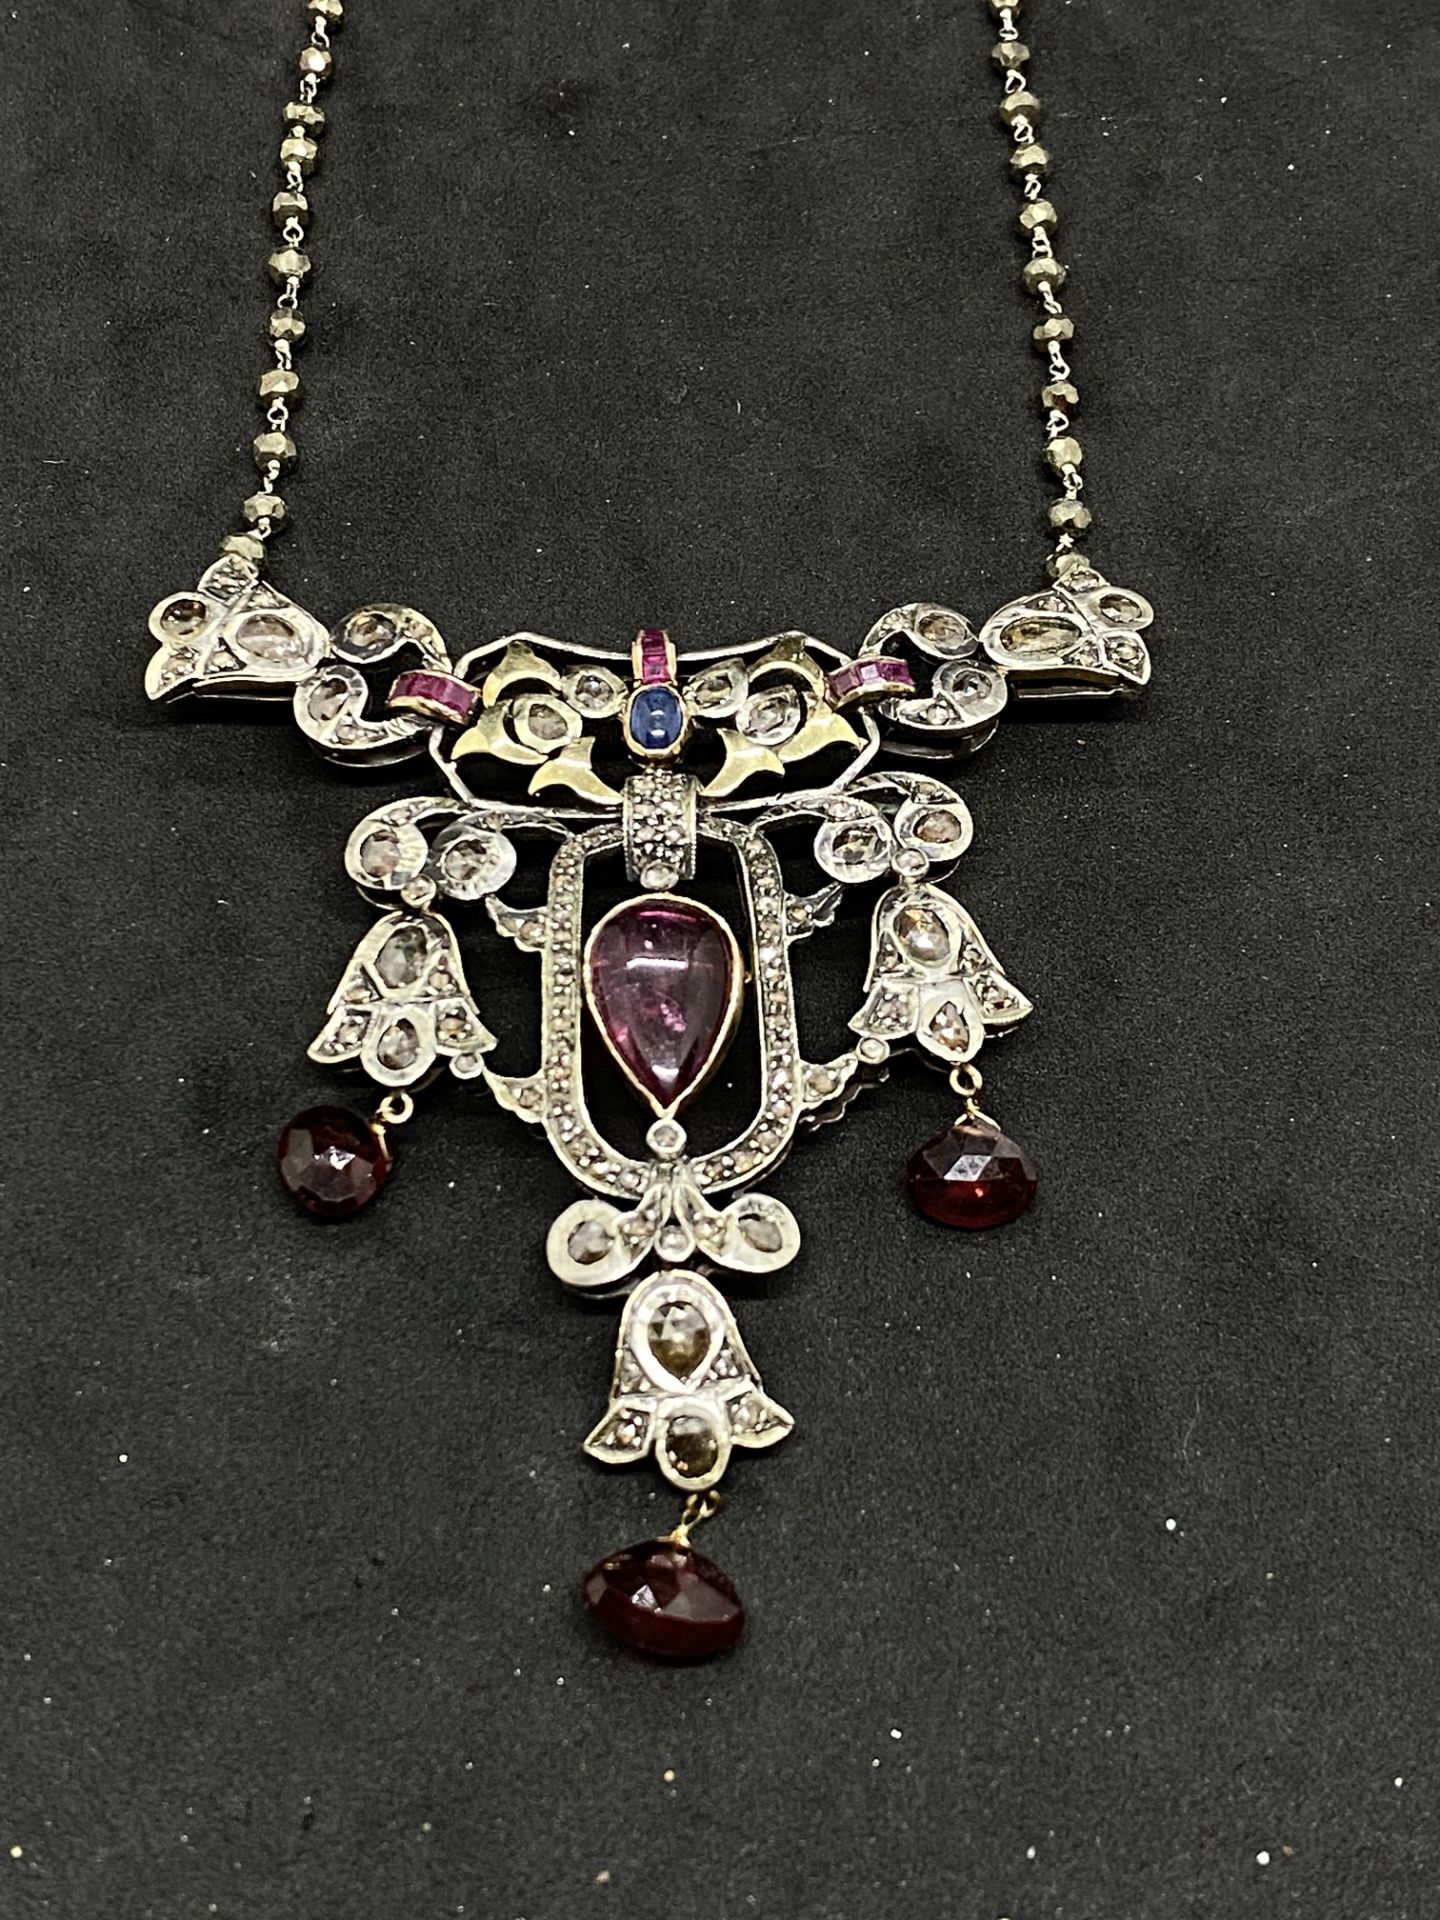 RUBY, ROSE DIAMOND, GARNET & SAPPHIRE SET NECKLACE IN YELLOW & WHITE METAL TESTED AS SILVER & GOLD - Image 10 of 12